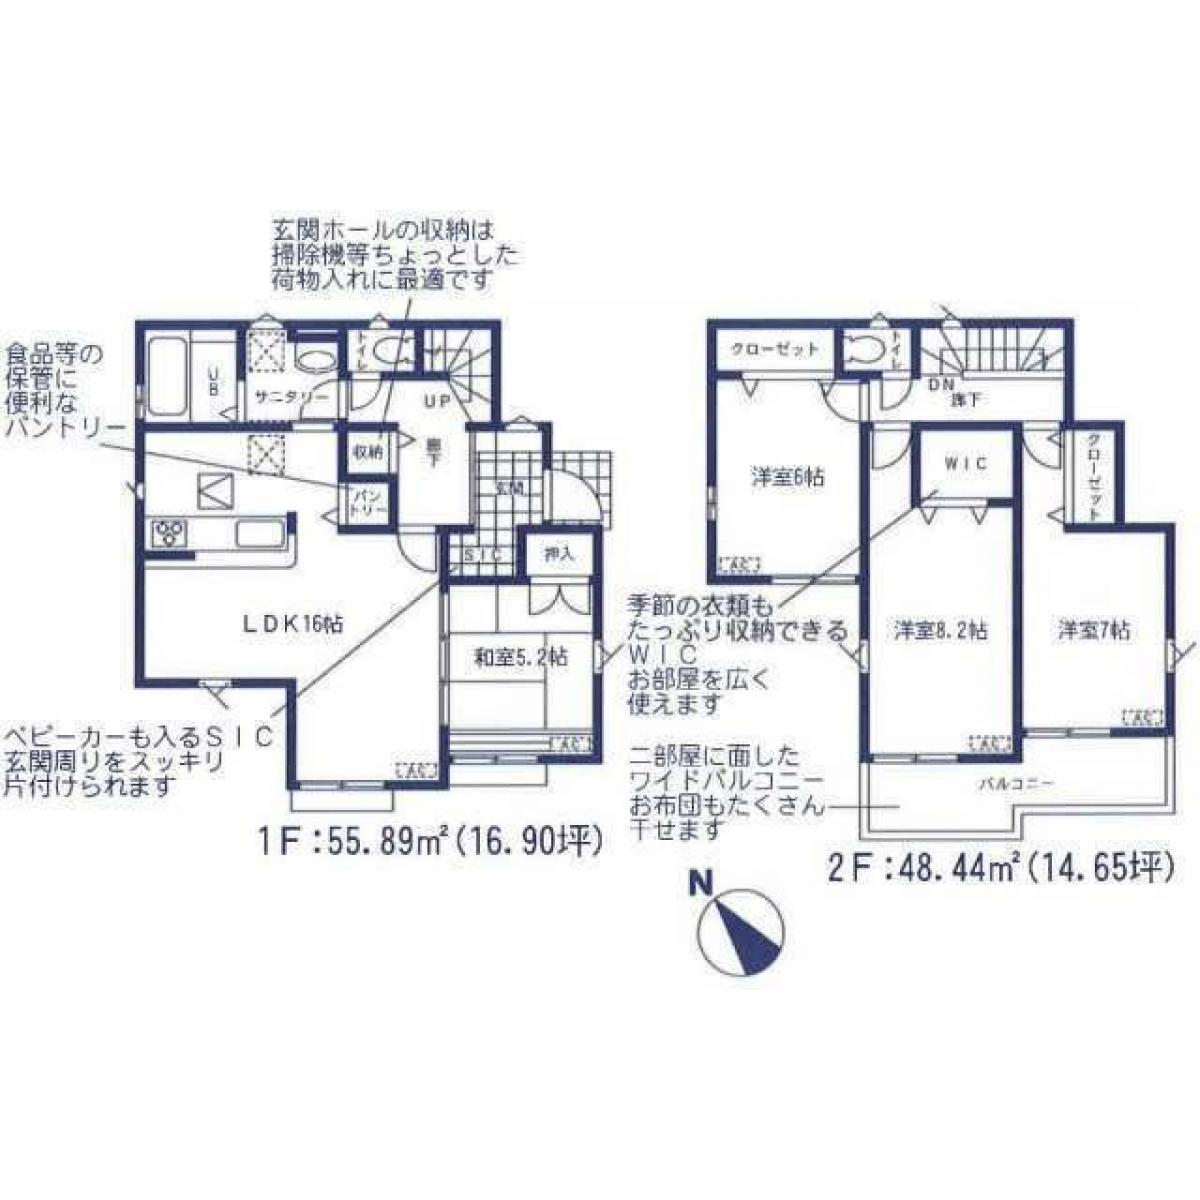 Picture of Home For Sale in Yotsukaido Shi, Chiba, Japan